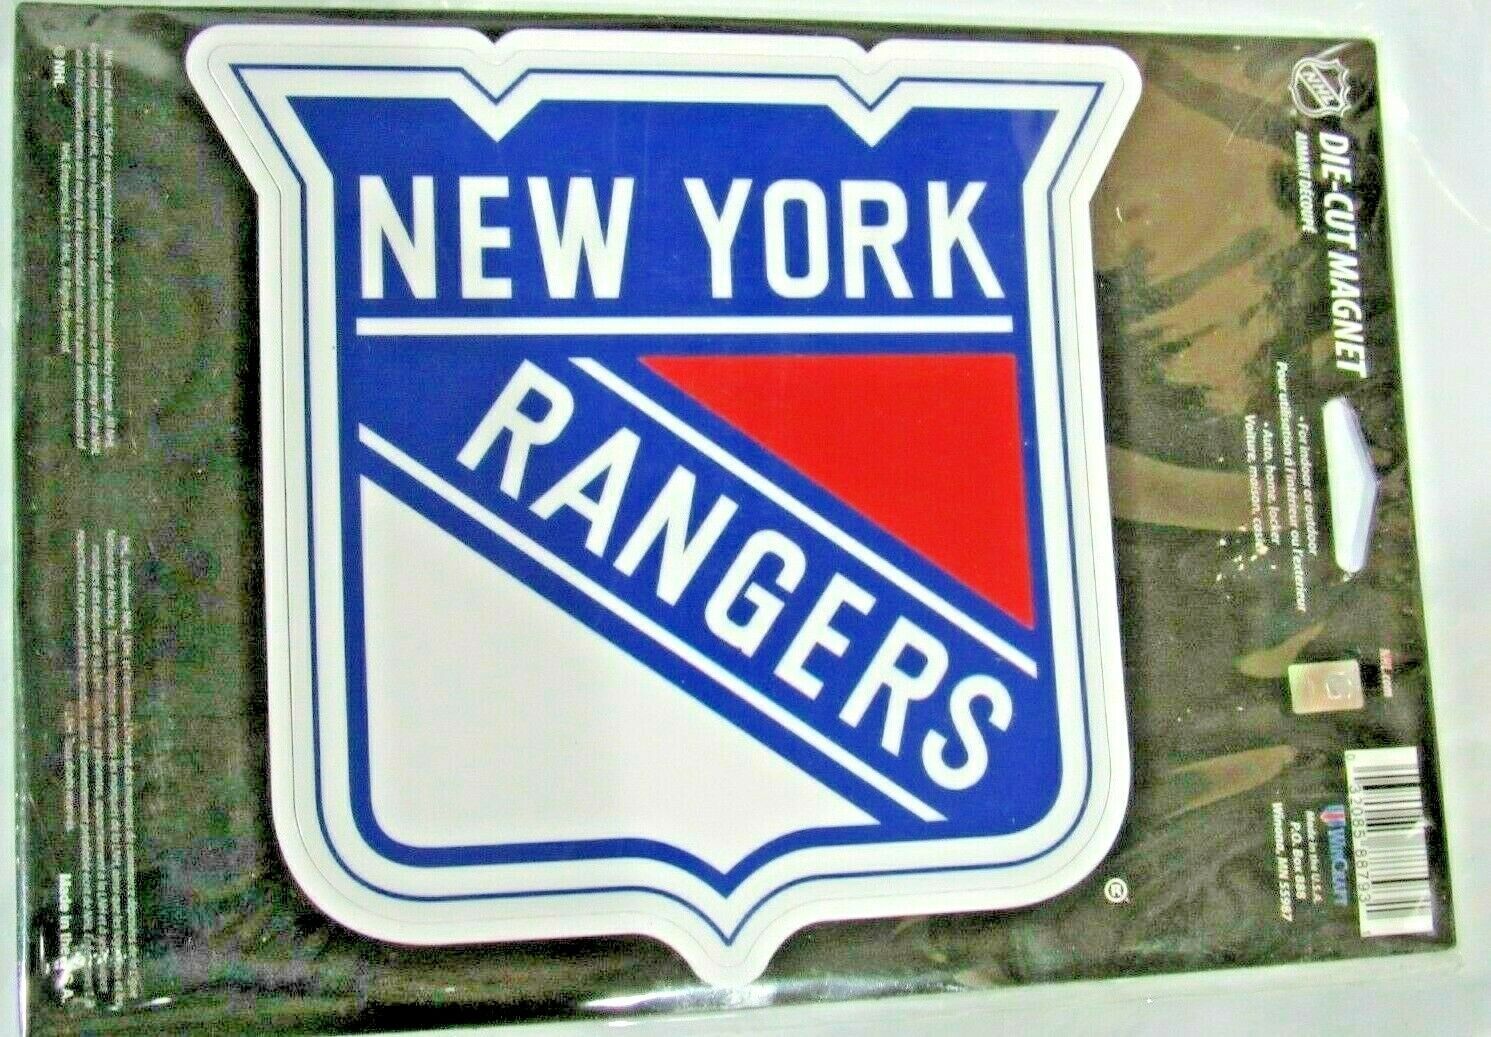 Primary image for NHL New York Rangers 8 inch Auto Magnet Die-Cut by WinCraft